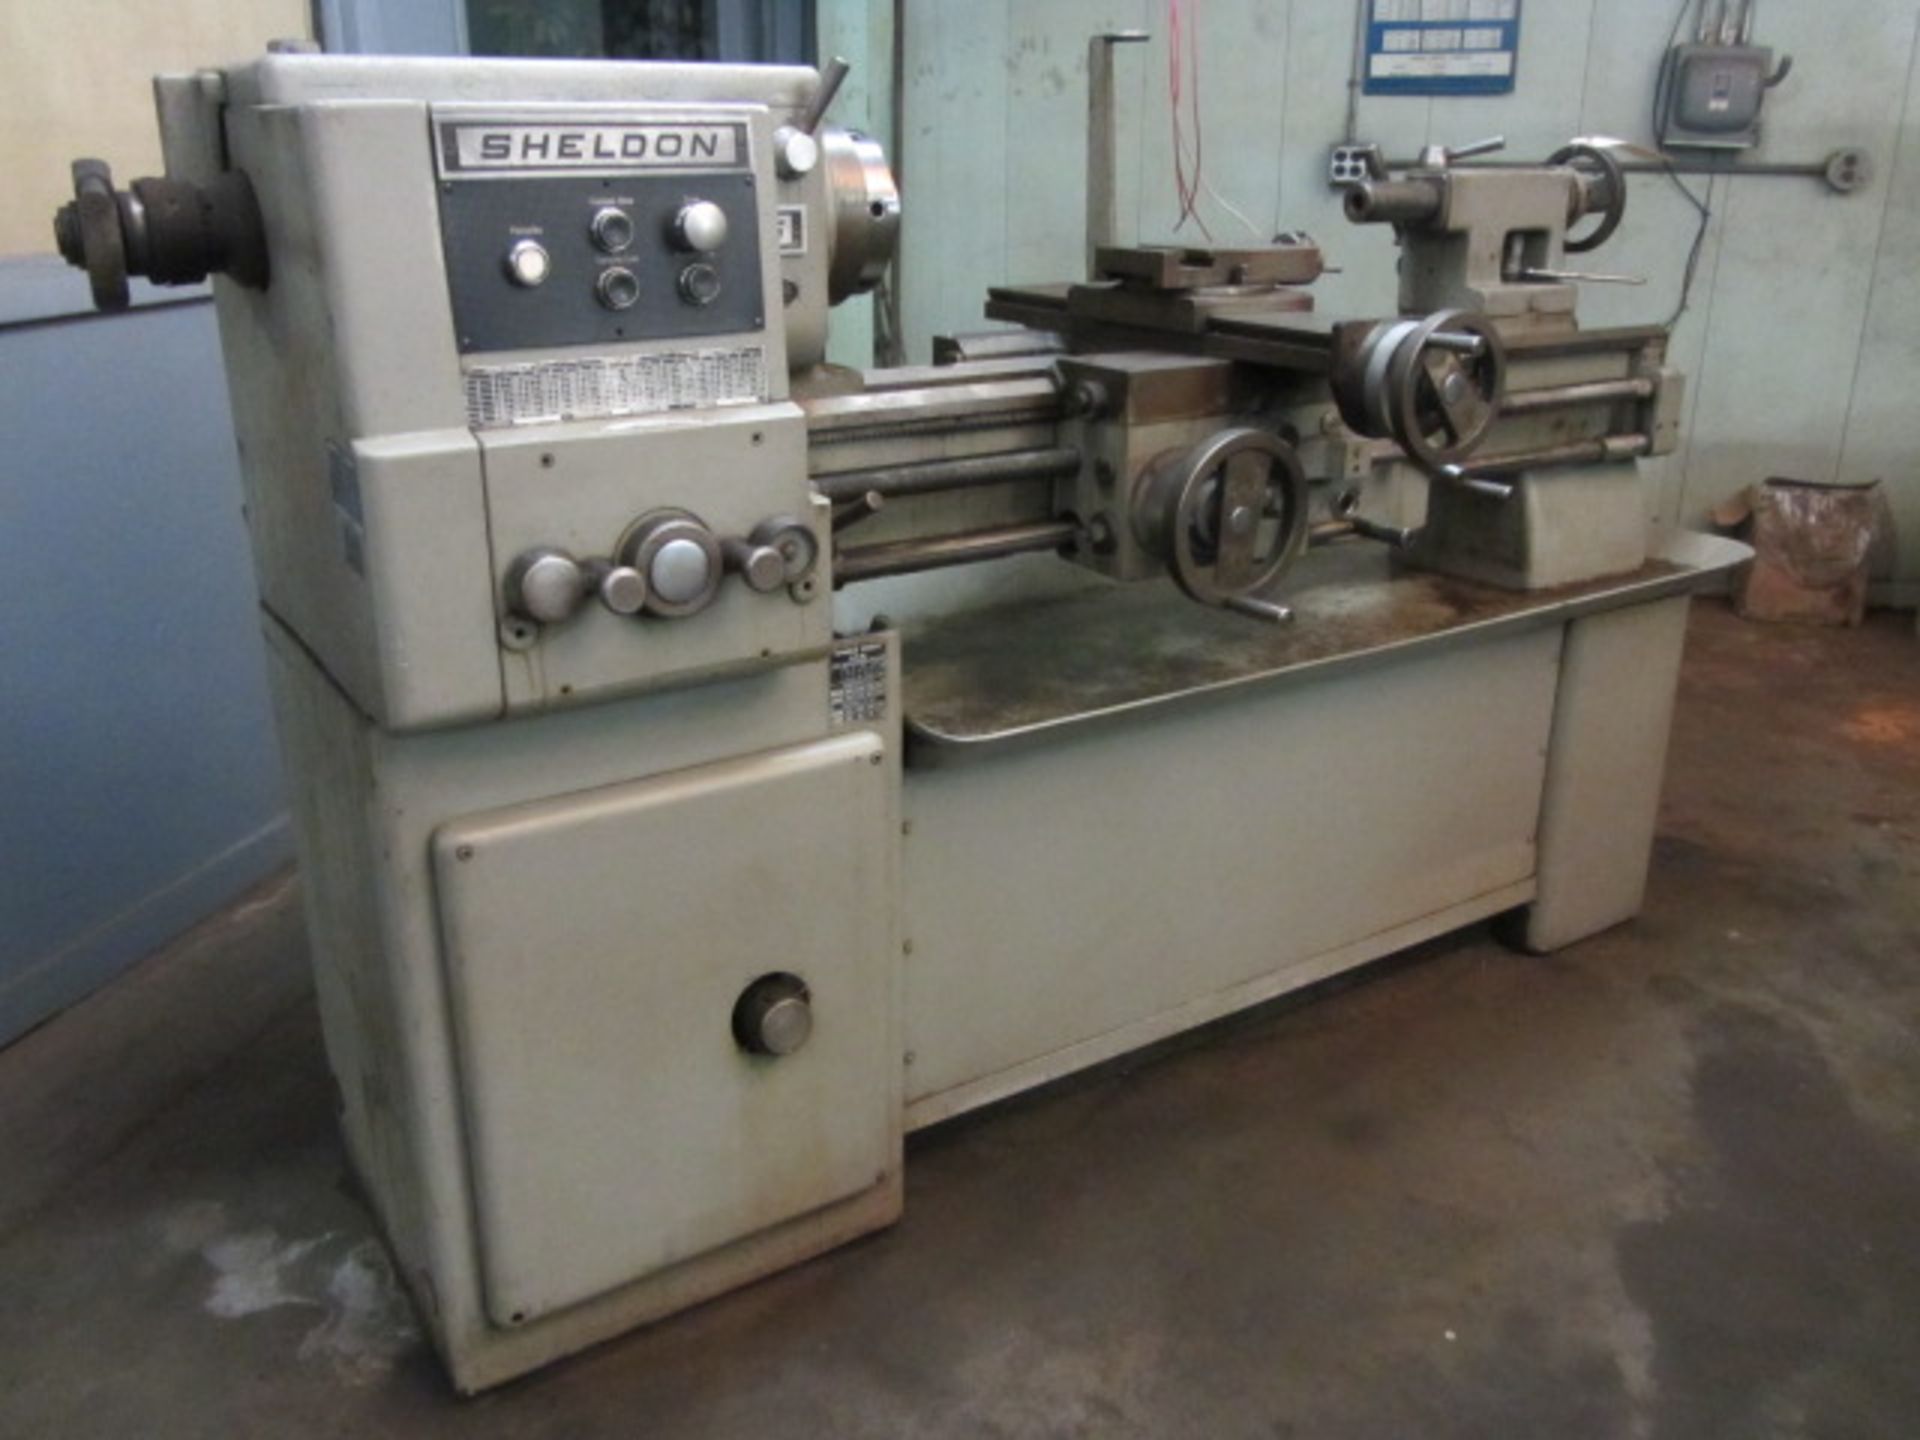 Sheldon Model 15 16'' x 46'' CC Engine Lathe with Spindle Speeds to 1250 RPM, Chip Pan, 5C Collet - Image 4 of 6